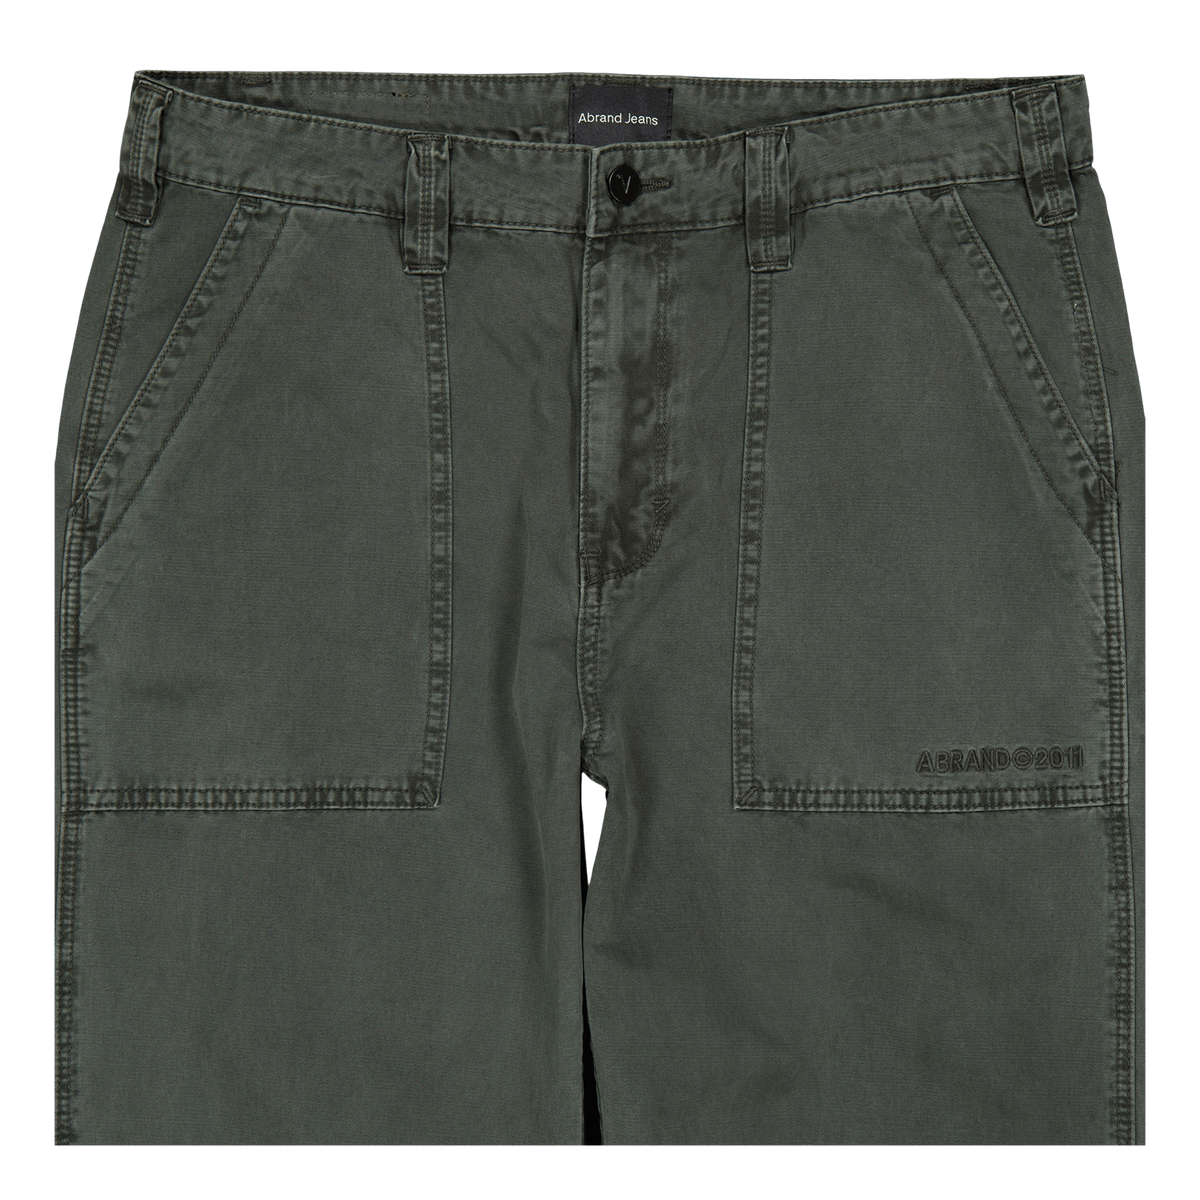 Abrand 95 Baggy Pant Forest